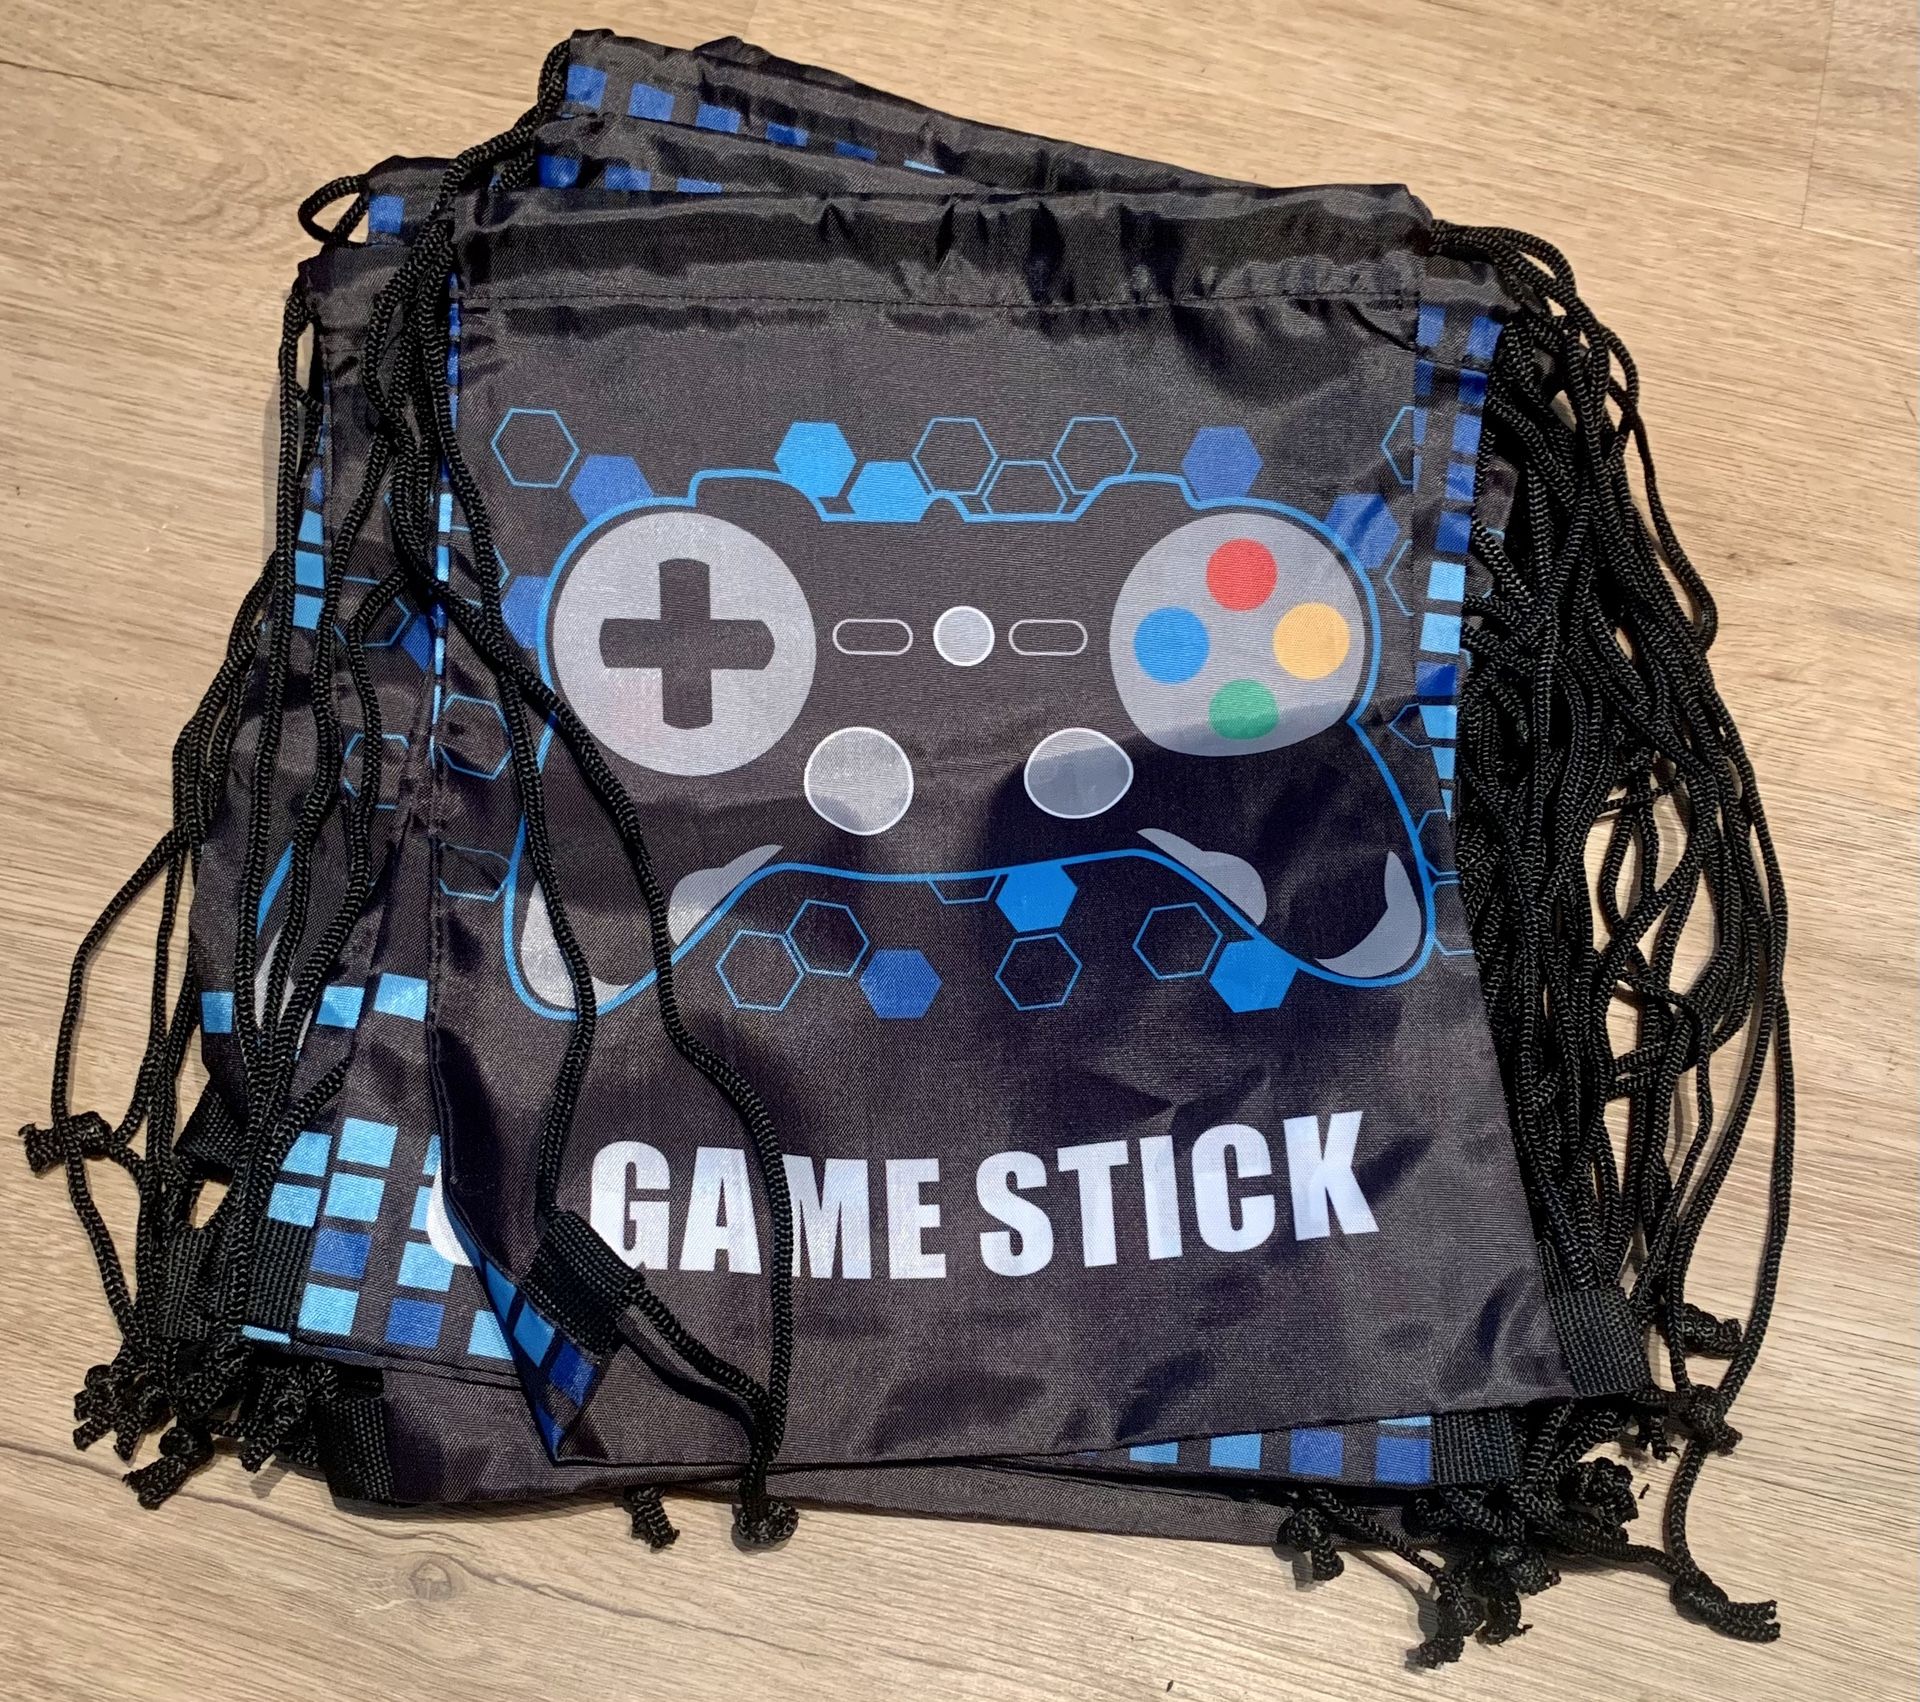 15 Pcs Game Stick Party Bags 12 x 10 Inch Gaming Theme Birthday Gift Bags for Kids Video Game Party Favors Goodie Candy Favor Bags Drawstring Blue and